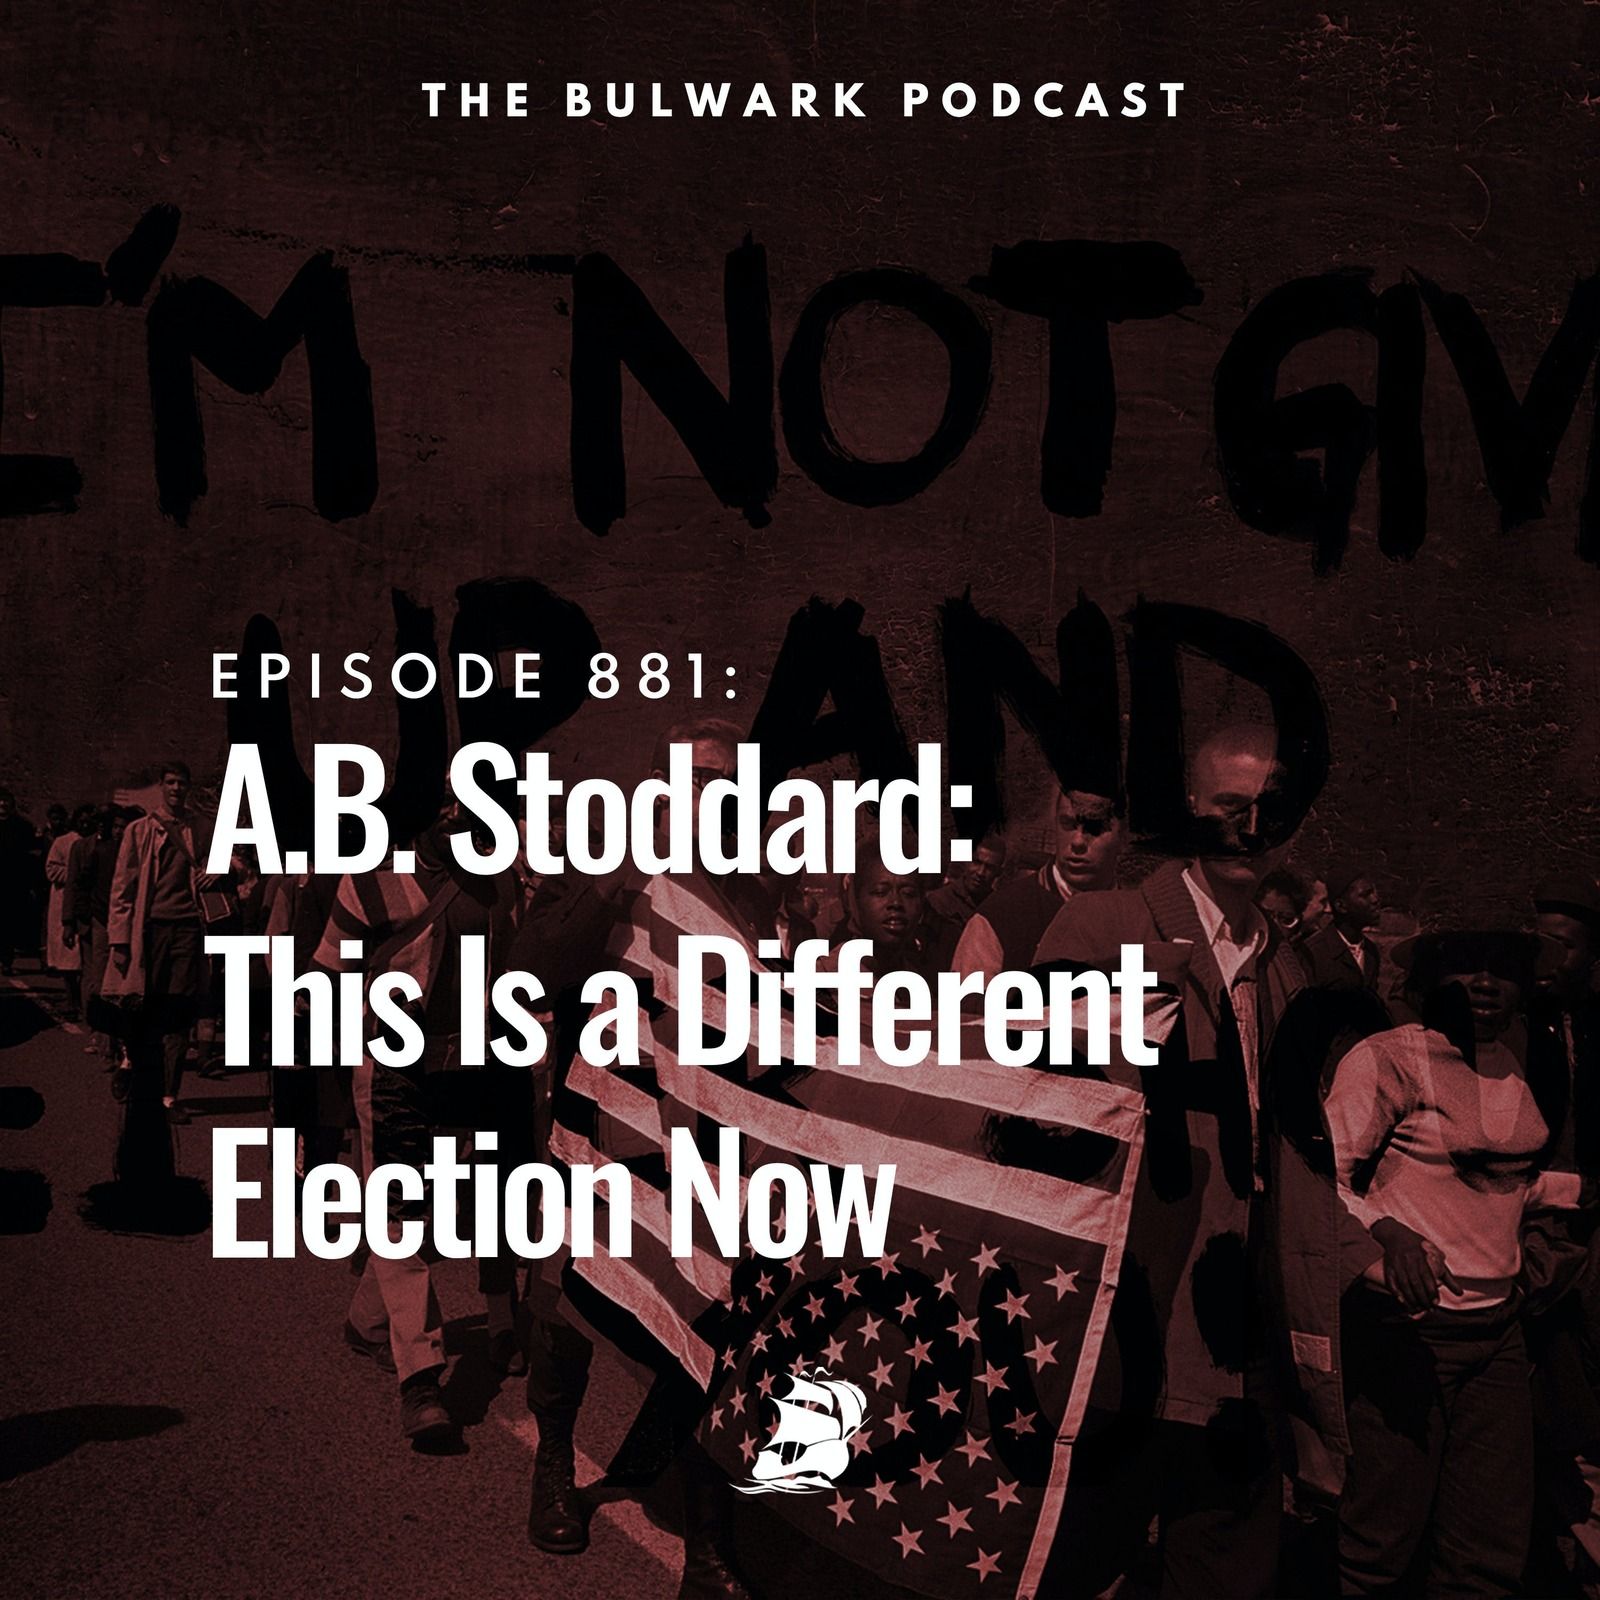 A.B. Stoddard: This Is a Different Election Now by The Bulwark Podcast